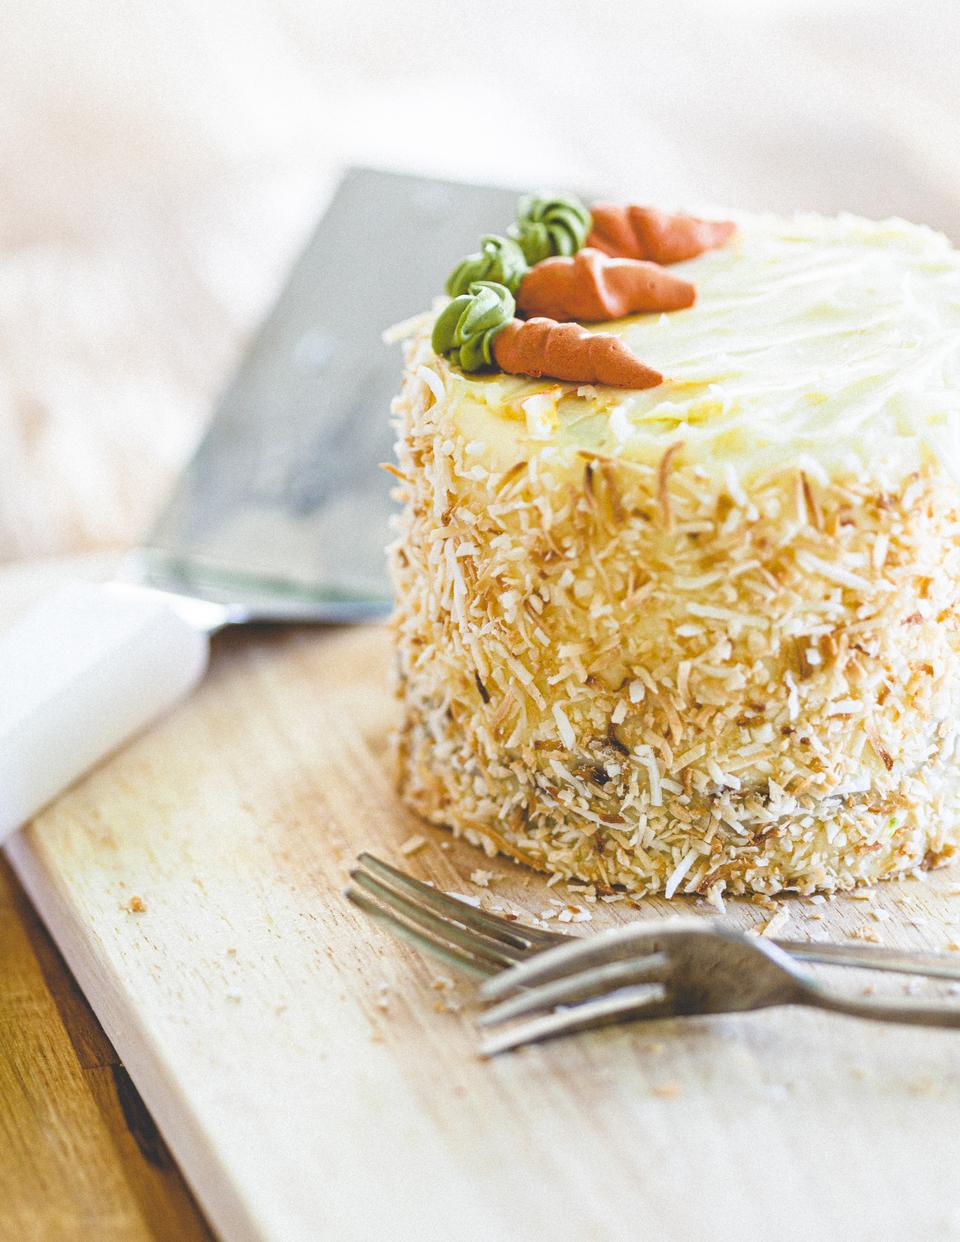 As Strange as It Sounds, We’ll Determine What Marvel Character You Are Simply by the Food You Choose Toasted coconut cake